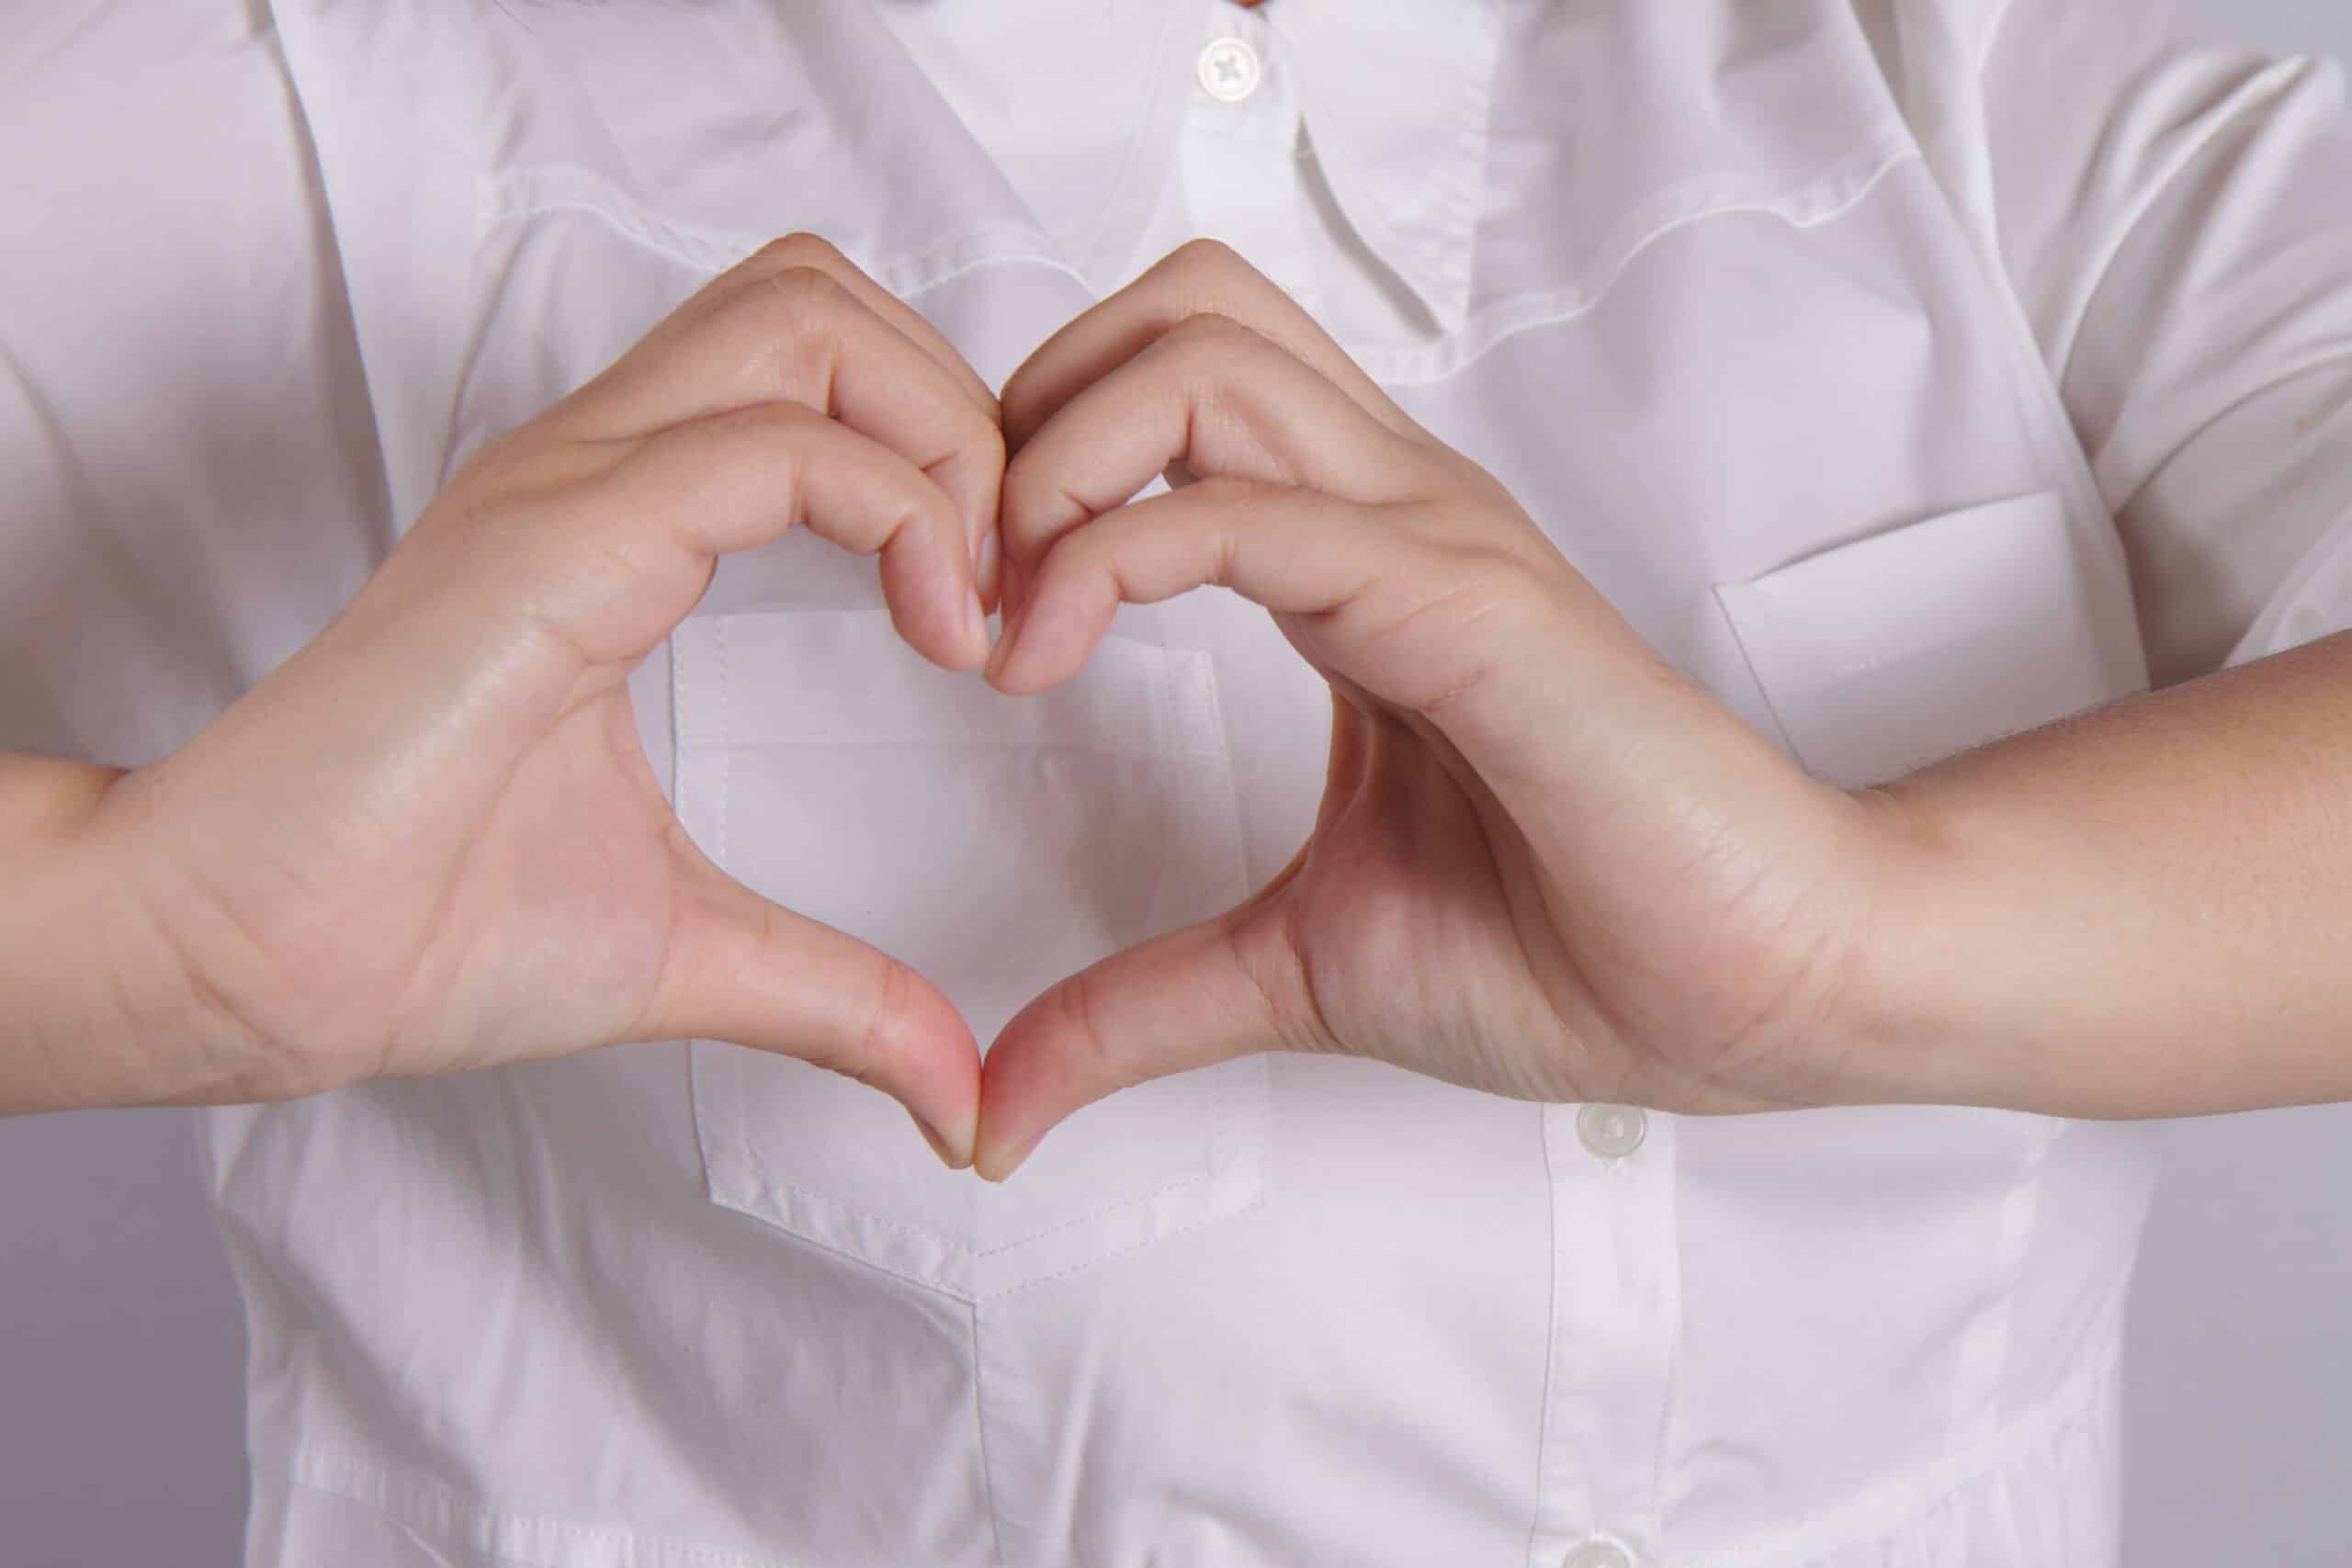 A zoomed in image of someone wearing a white blouse and holding their hands in a heart shape.